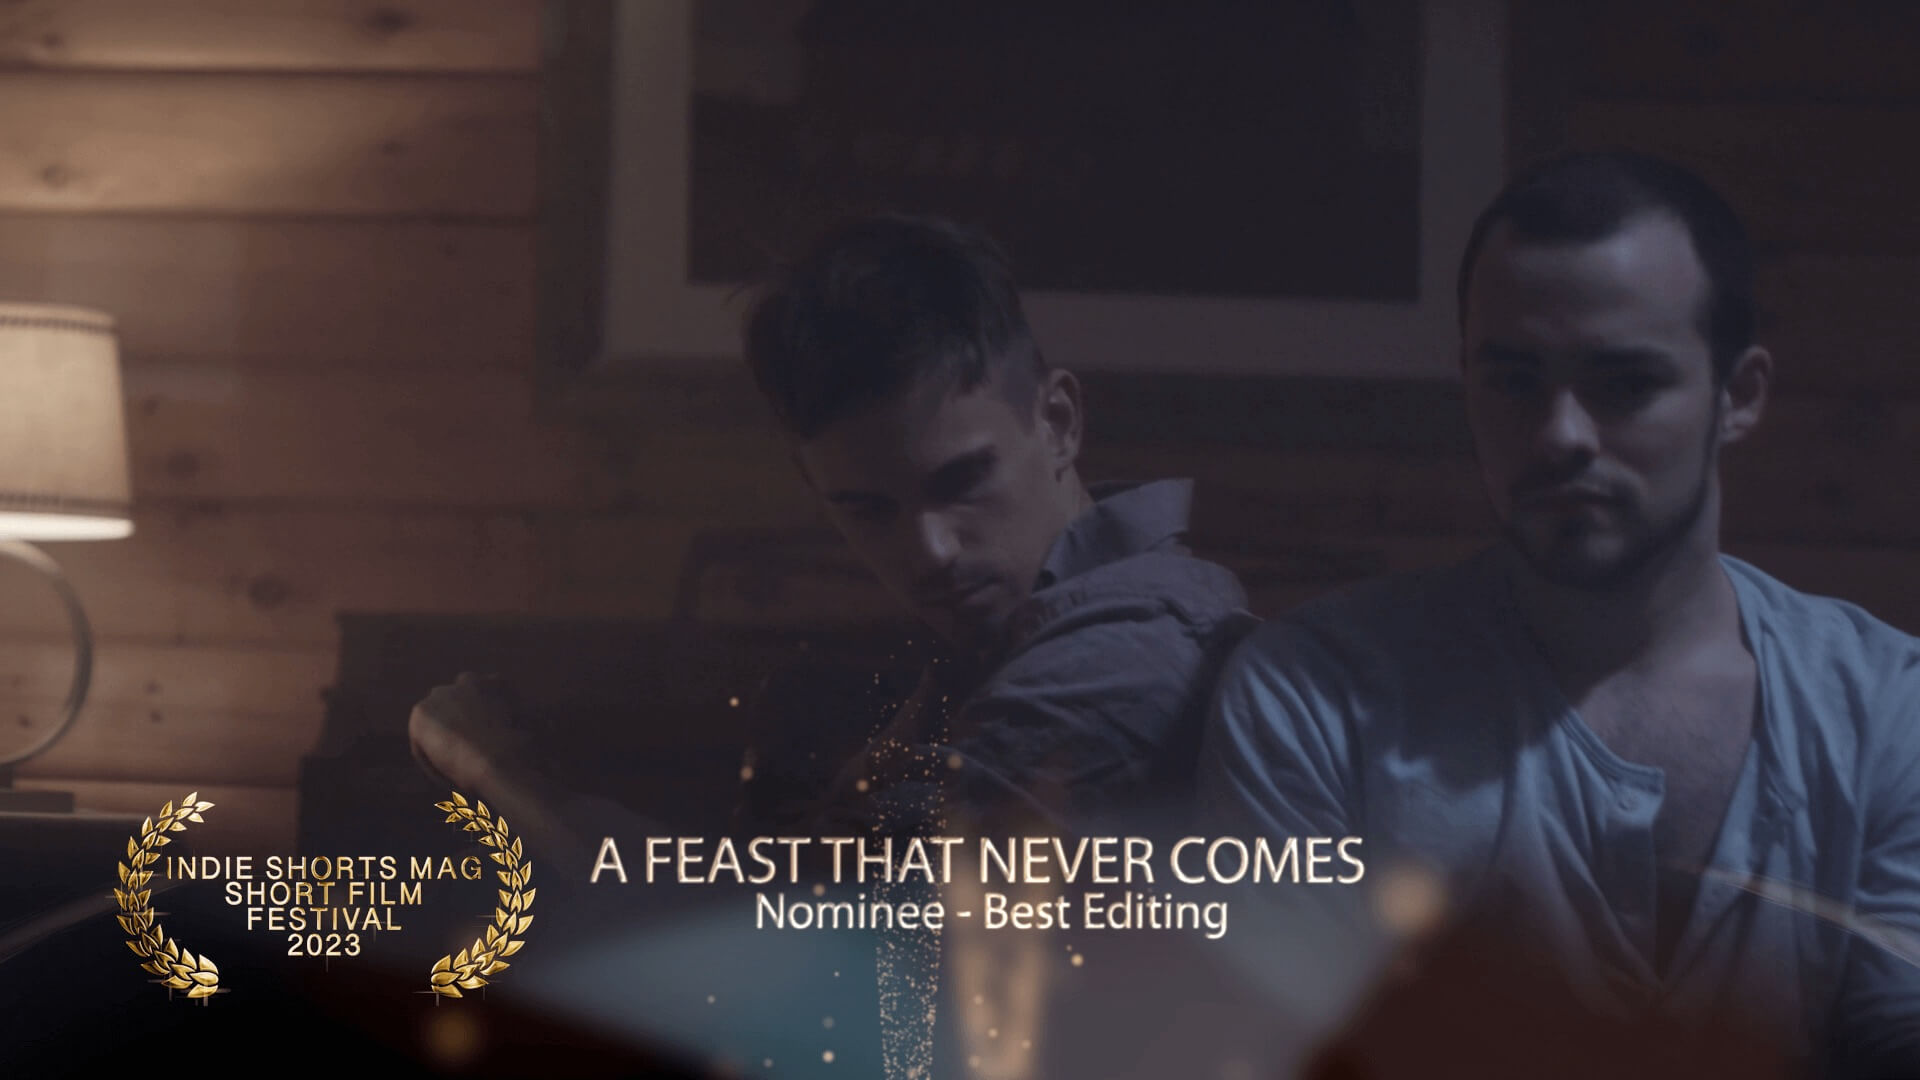 Indie Shorts Mag Short Film Festival - Best Editing - Nominee - A Feast That Never Comes